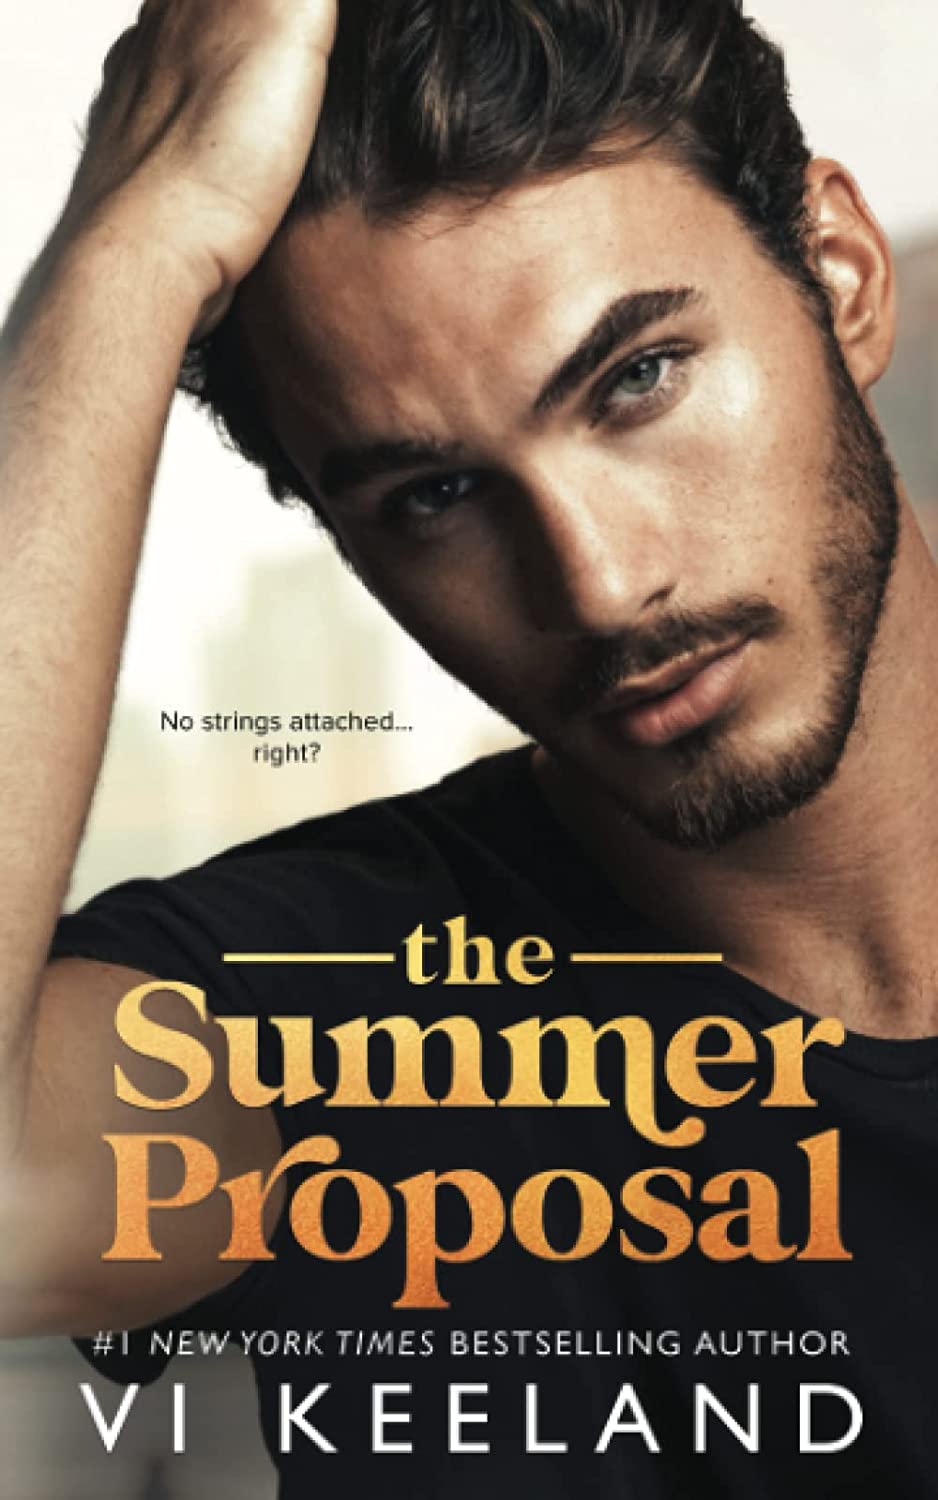 The Summer Proposal by Vi Keeland